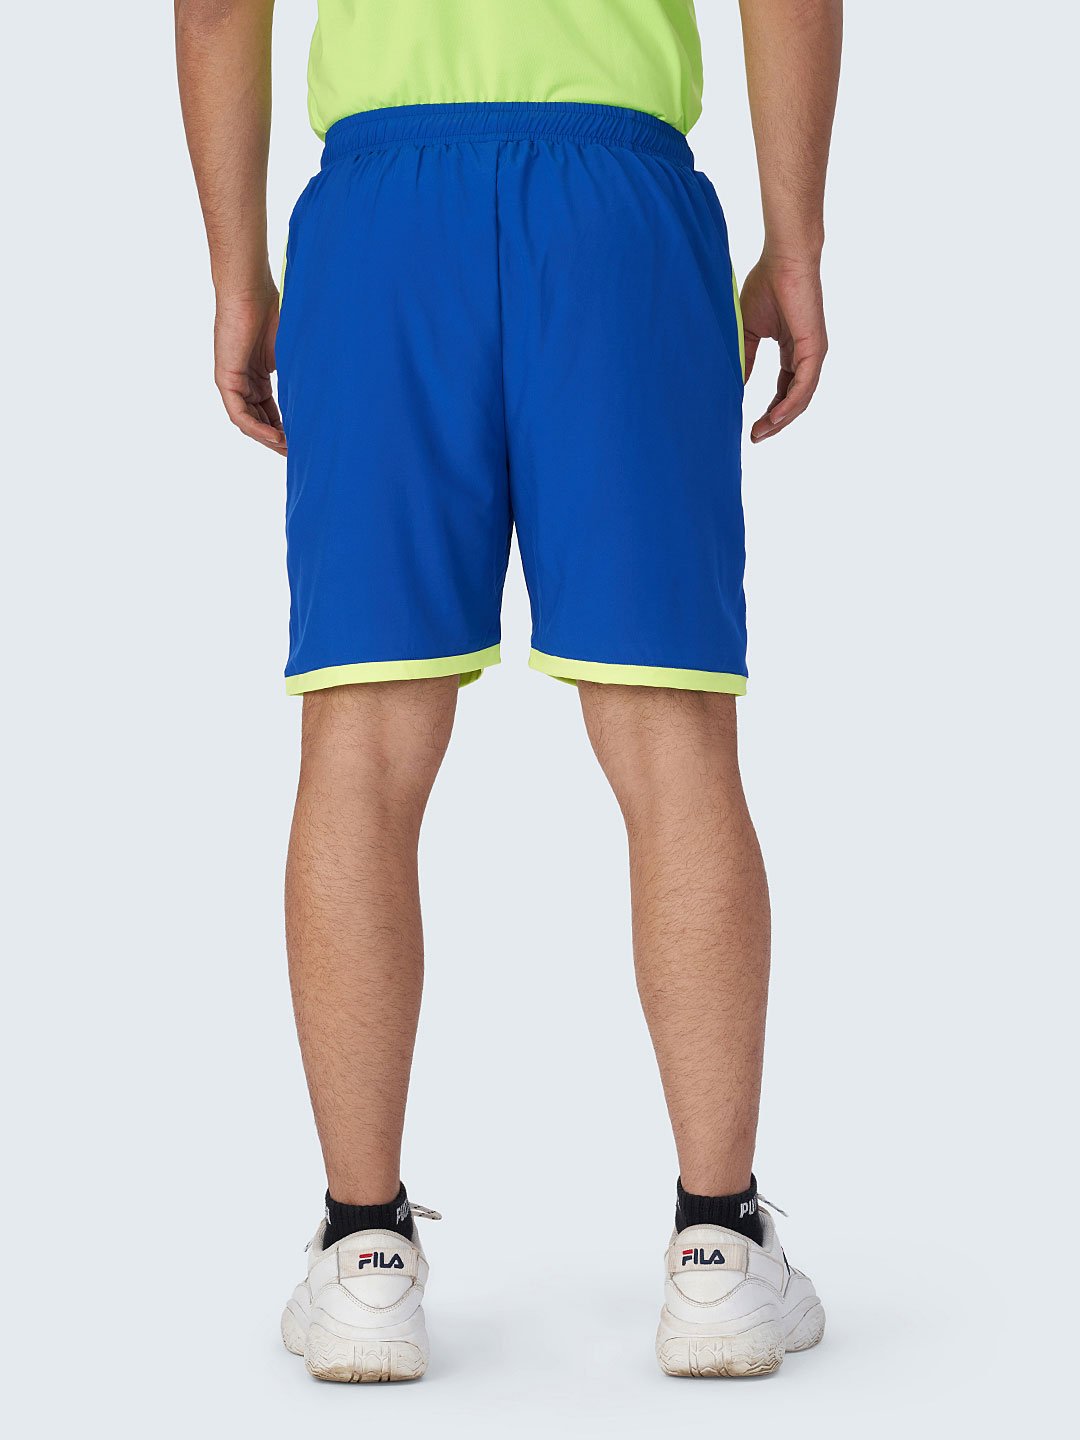 Men's Active Sports Shorts with Side Stripe: Royal Blue